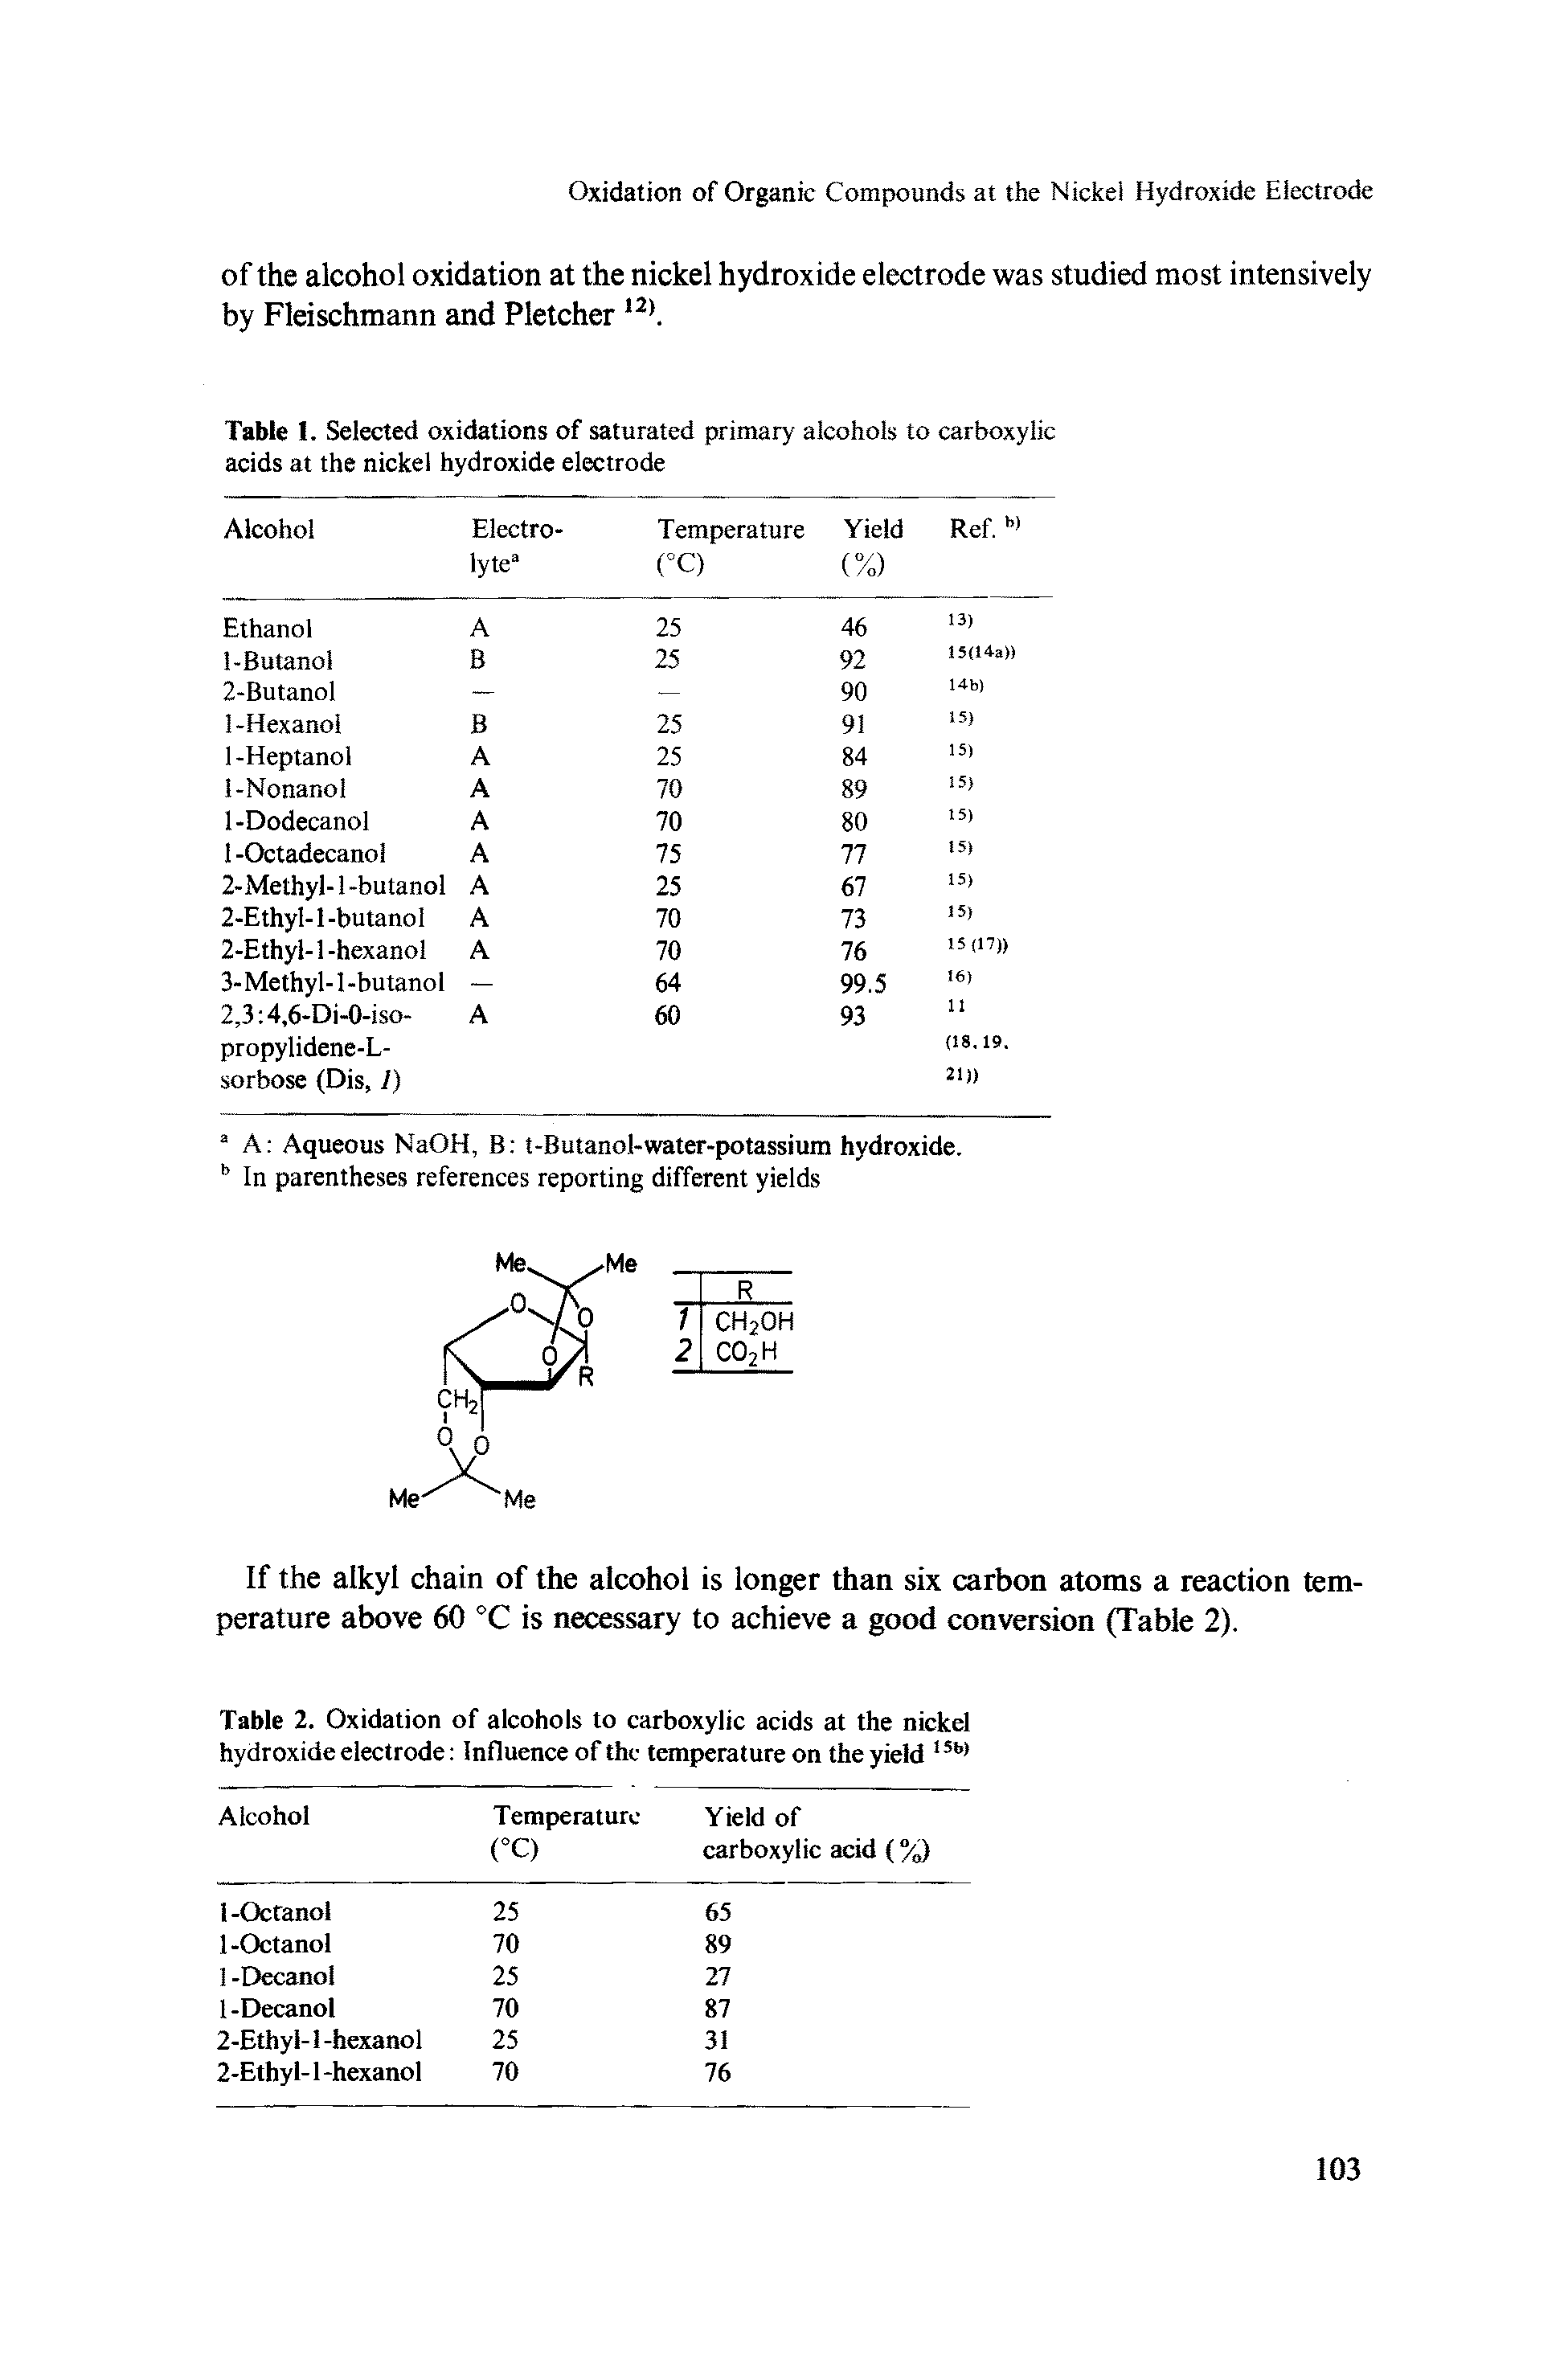 Table 2. Oxidation of alcohols to carboxylic acids at the nickel hydroxide electrode Influence of the temperature on the yield...